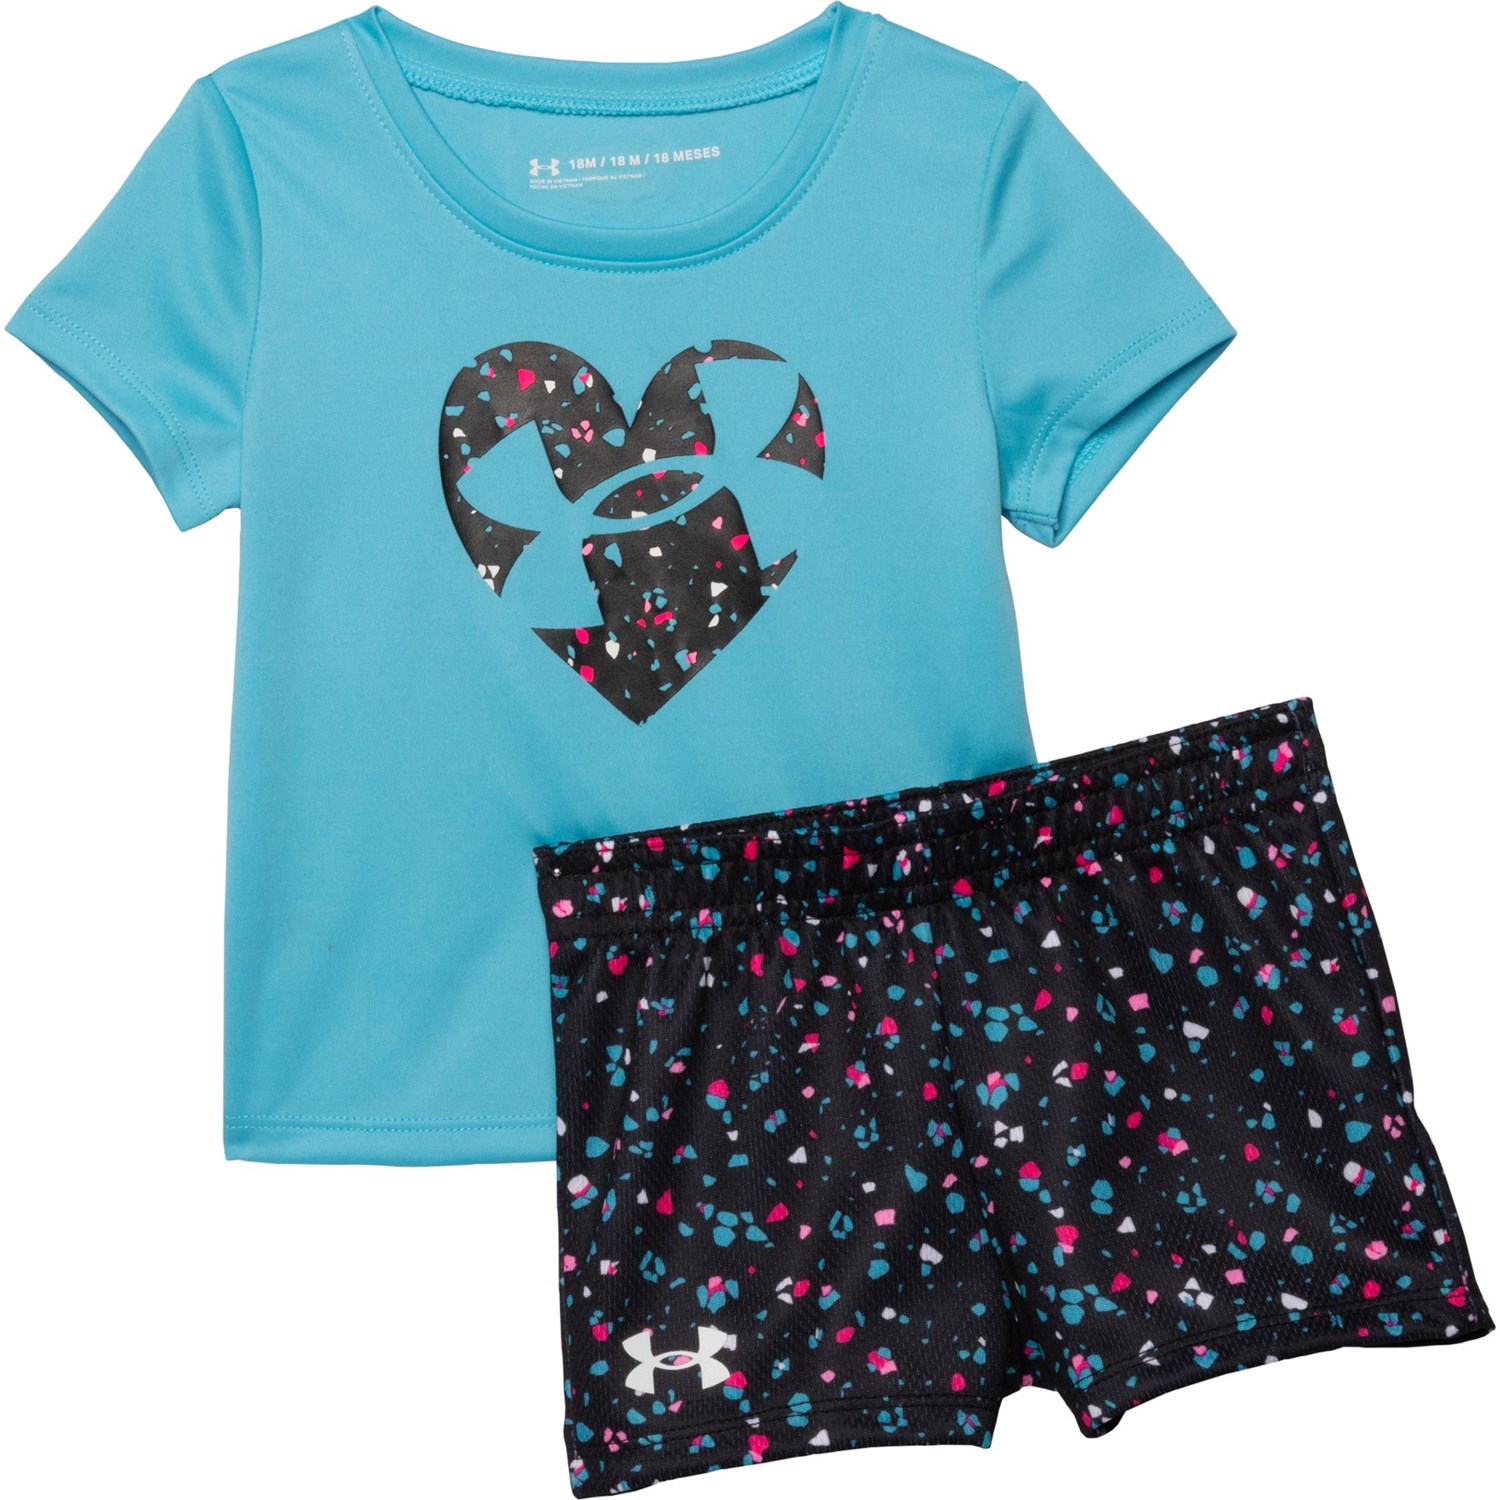 Under Armour Infant Girls Terrazzo Leopard Heart Shirt and Shorts Set - Short Sleeve